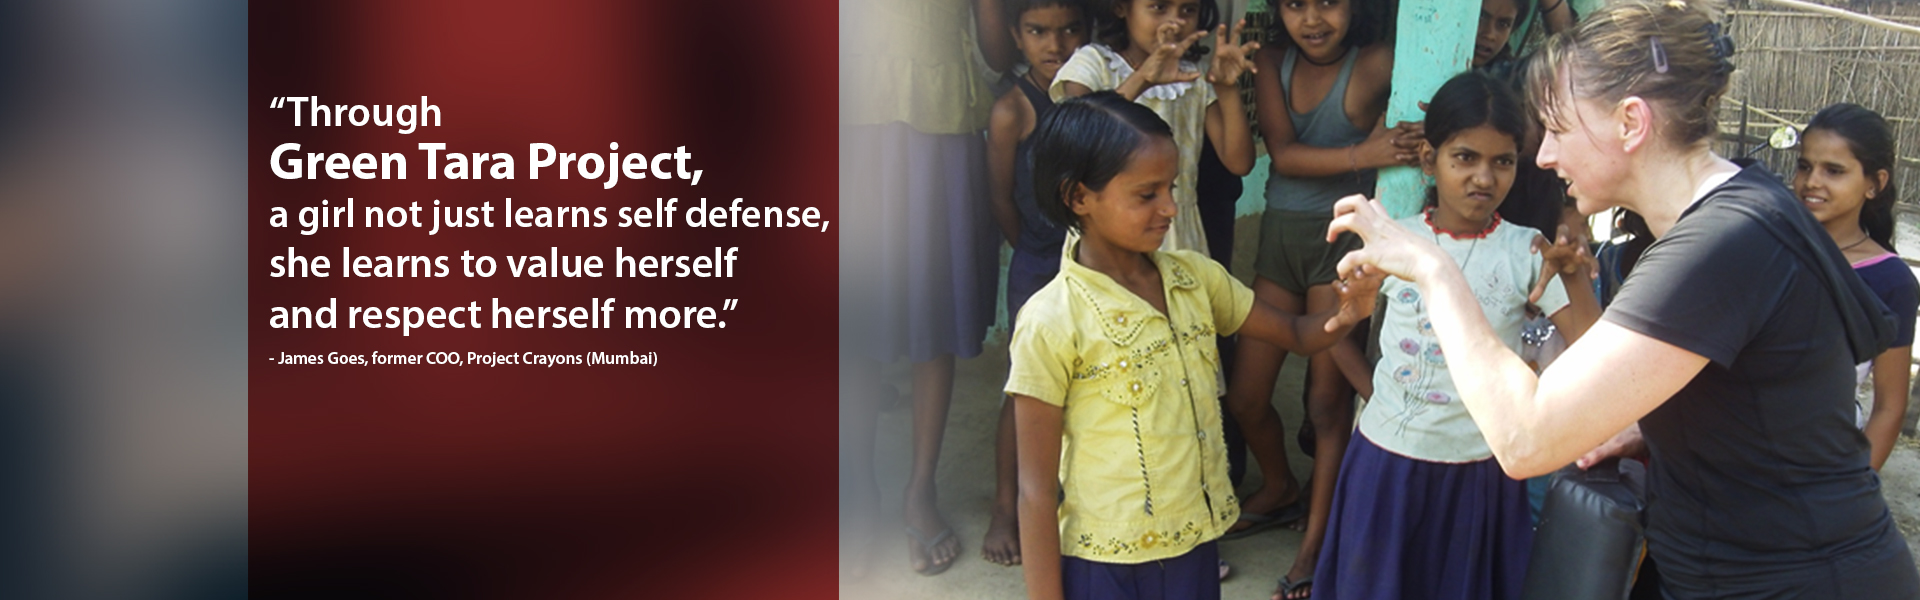 Through Green Tara Project, a girl not just learns self defense, she learns to value herself and respect herself more.